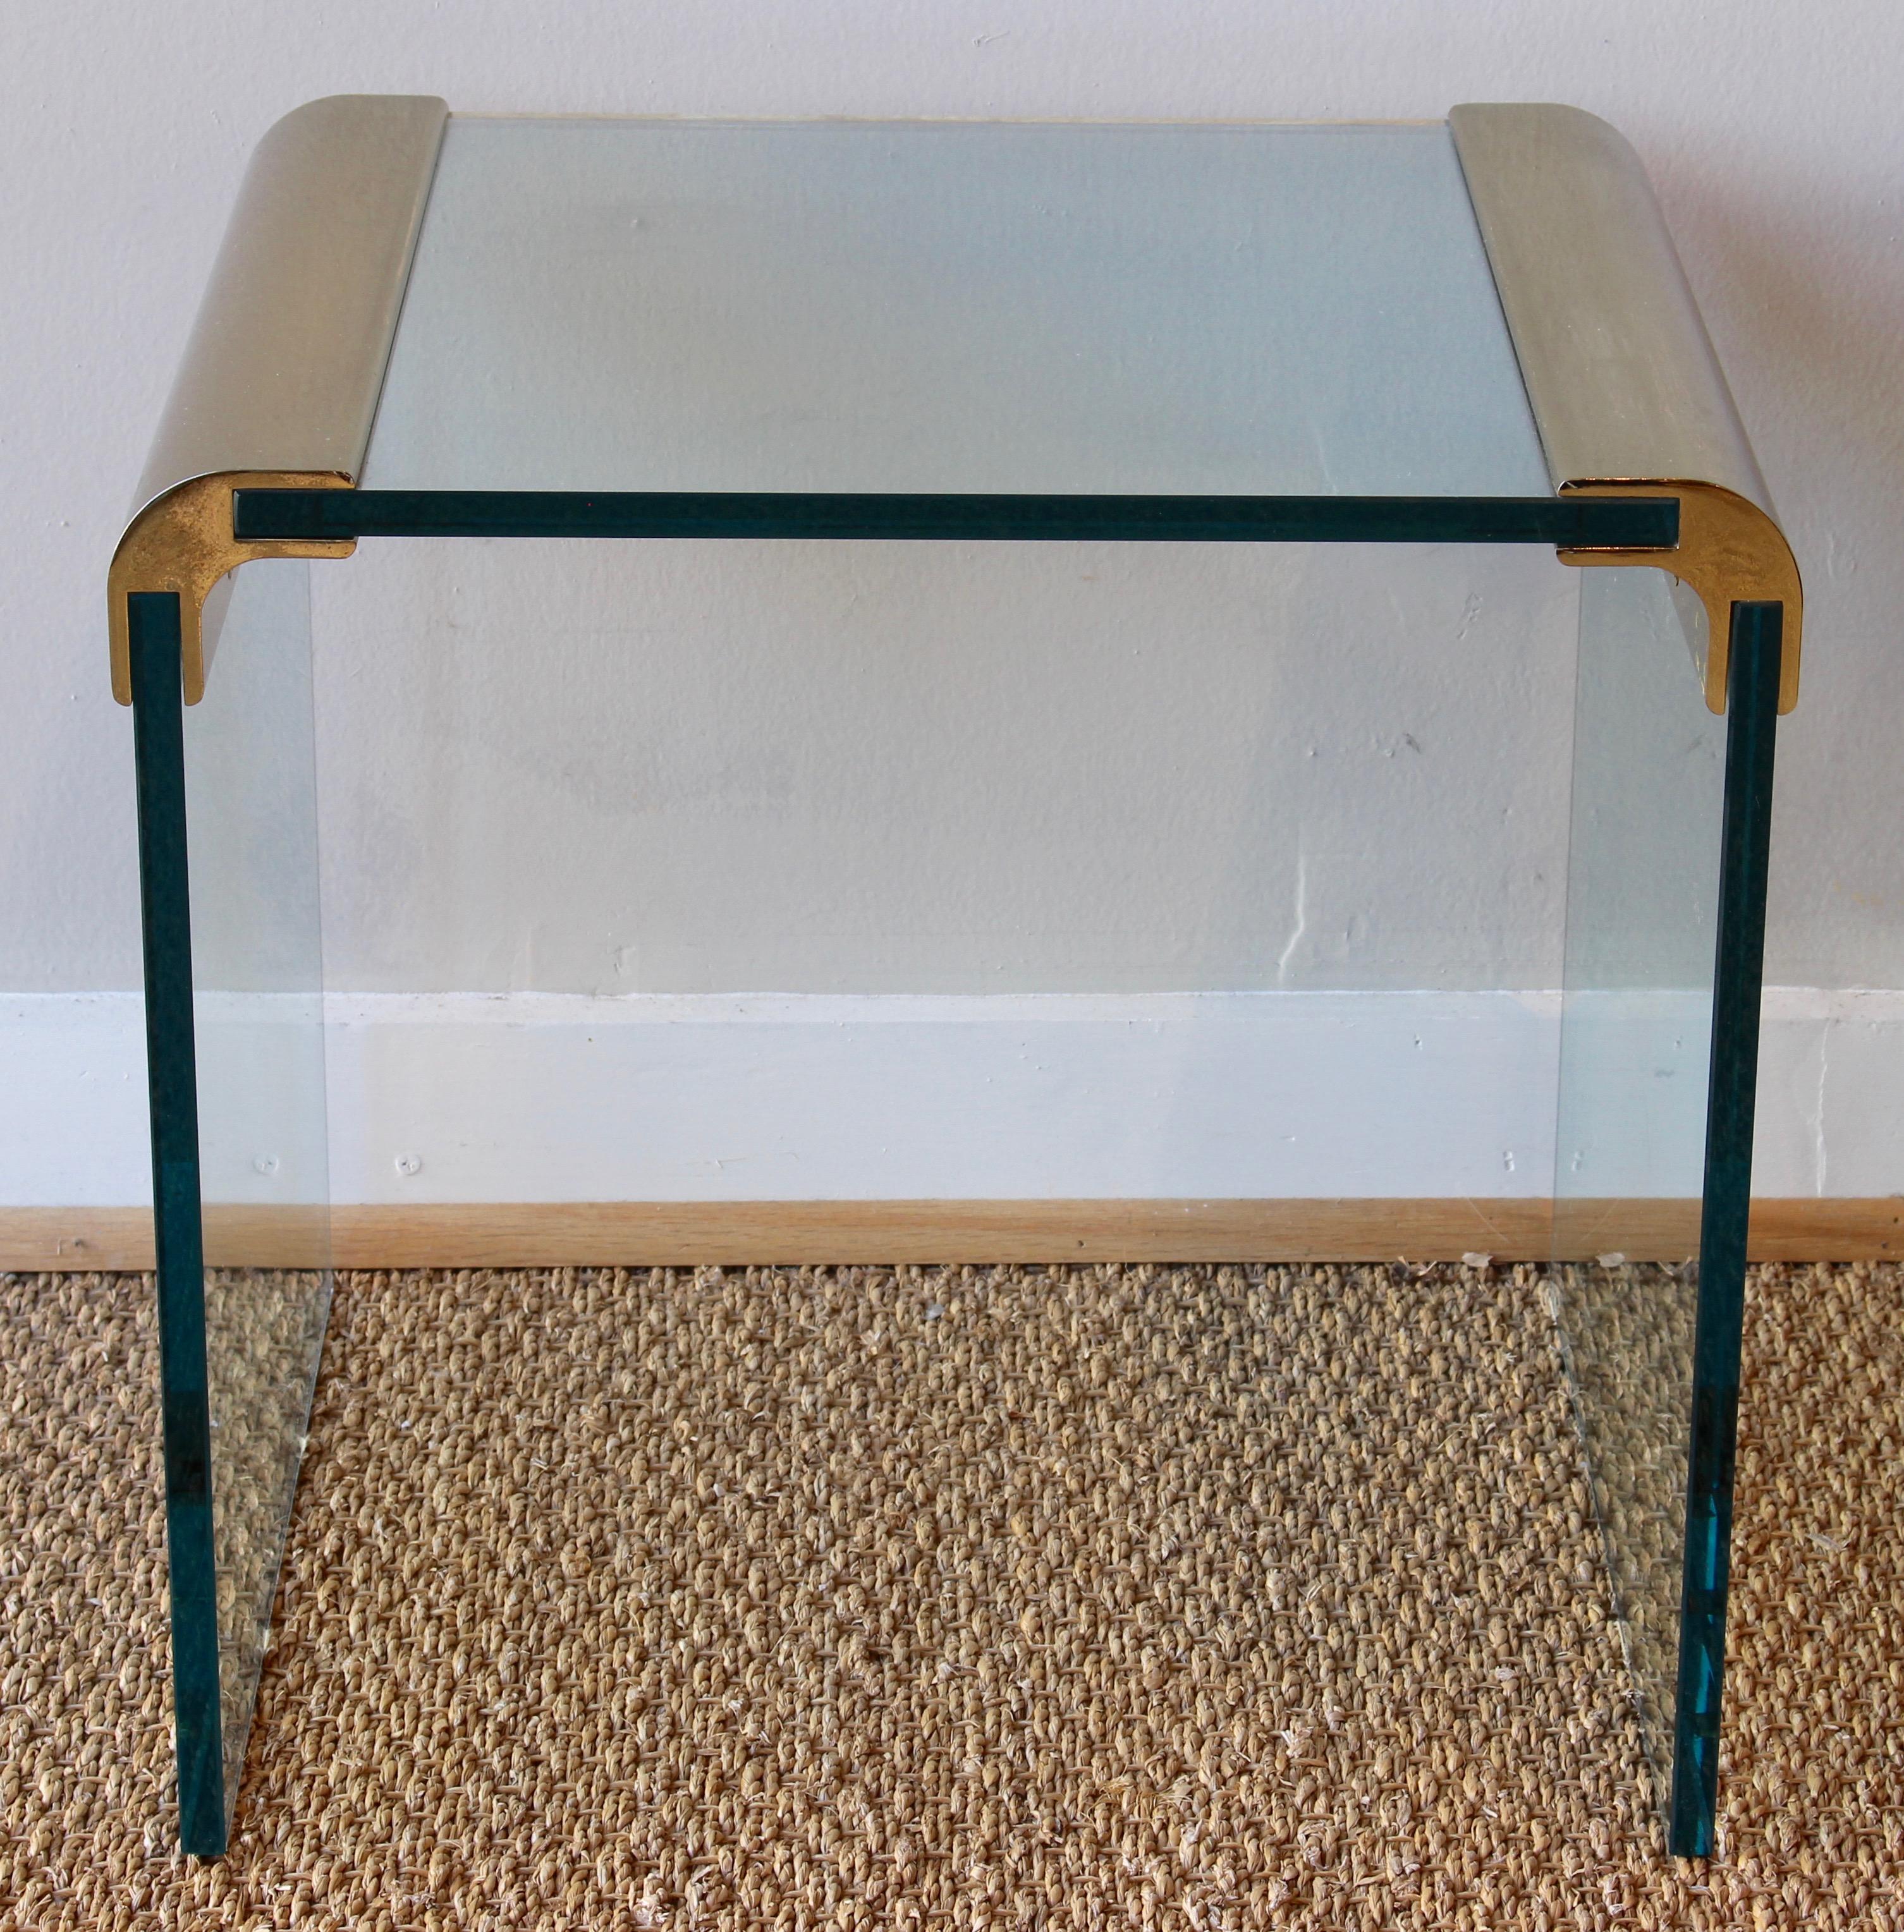 Pair of Pace Furniture Leon Rosen Brass and Glass Side Tables (amerikanisch)